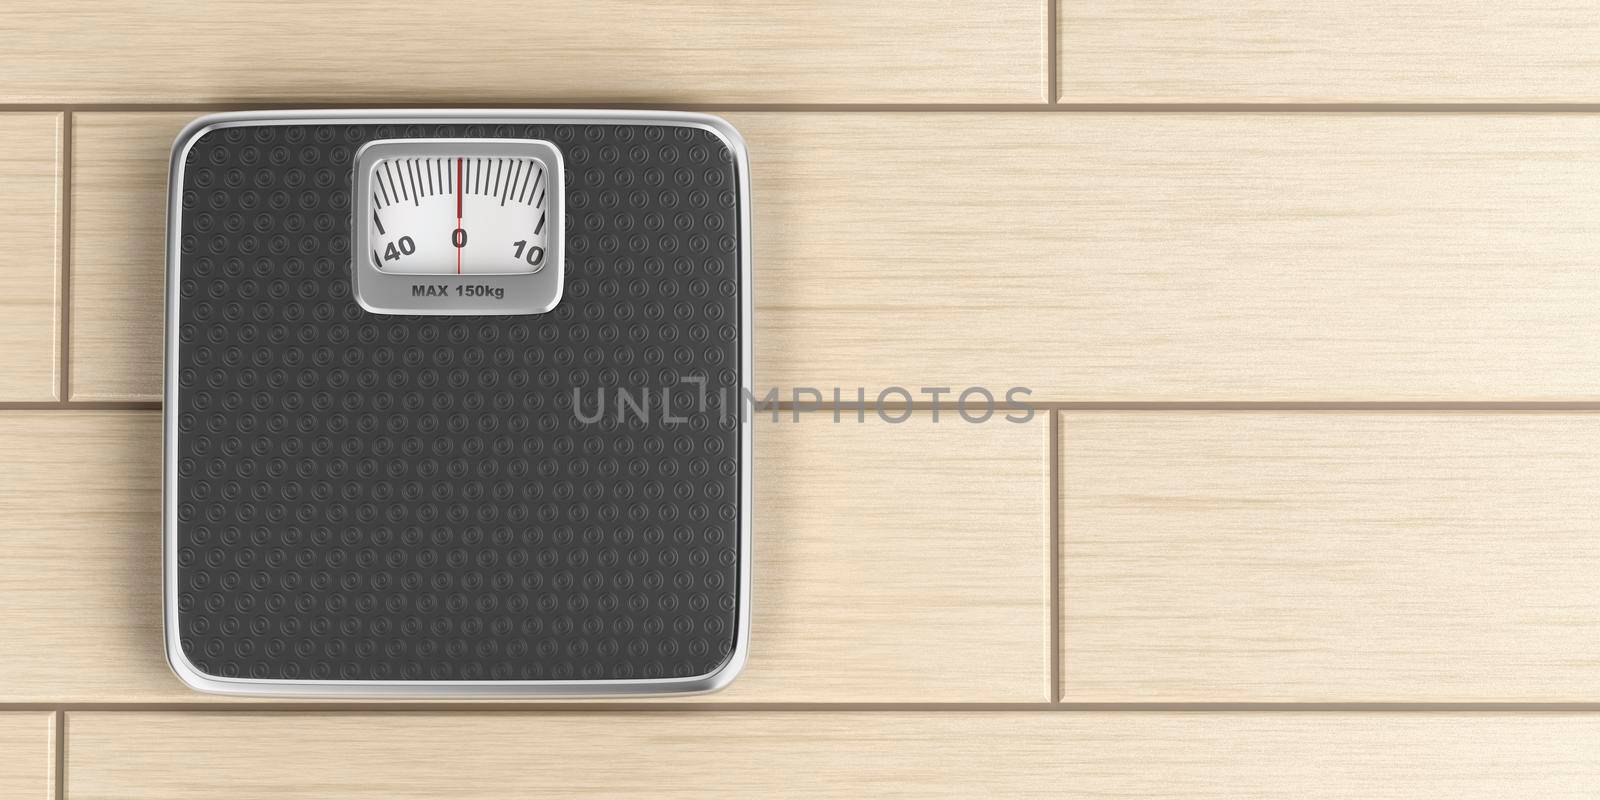 Mechanical weighing scale on the wood floor, top view